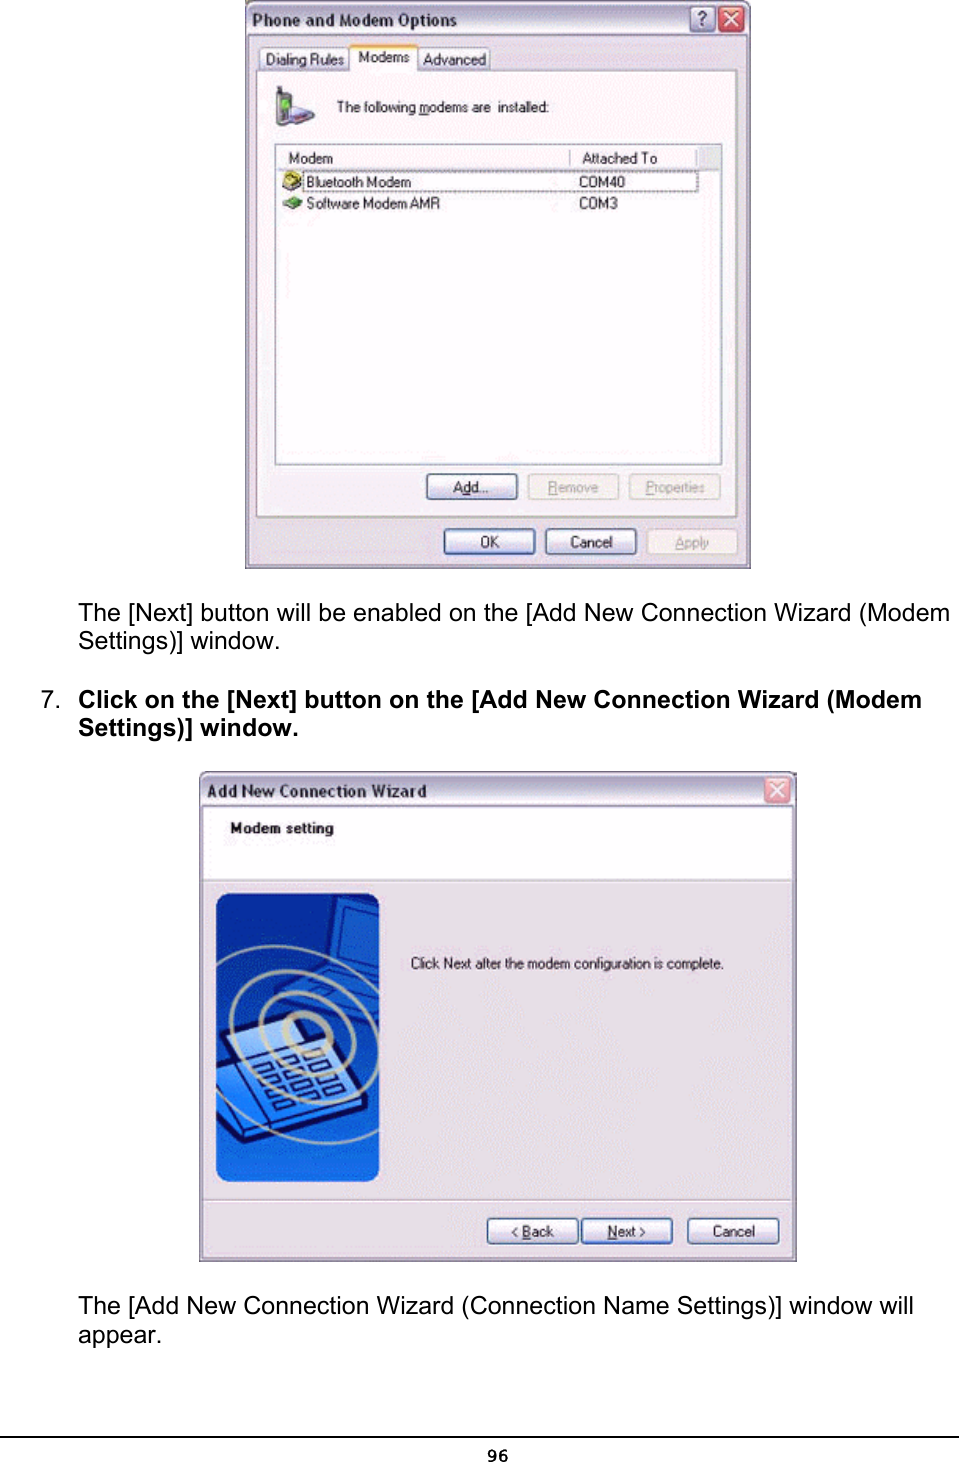         The [Next] button will be enabled on the [Add New Connection Wizard (Modem    Settings)] window. 7.  Click on the [Next] button on the [Add New Connection Wizard (Modem Settings)] window.        The [Add New Connection Wizard (Connection Name Settings)] window will            appear.  96